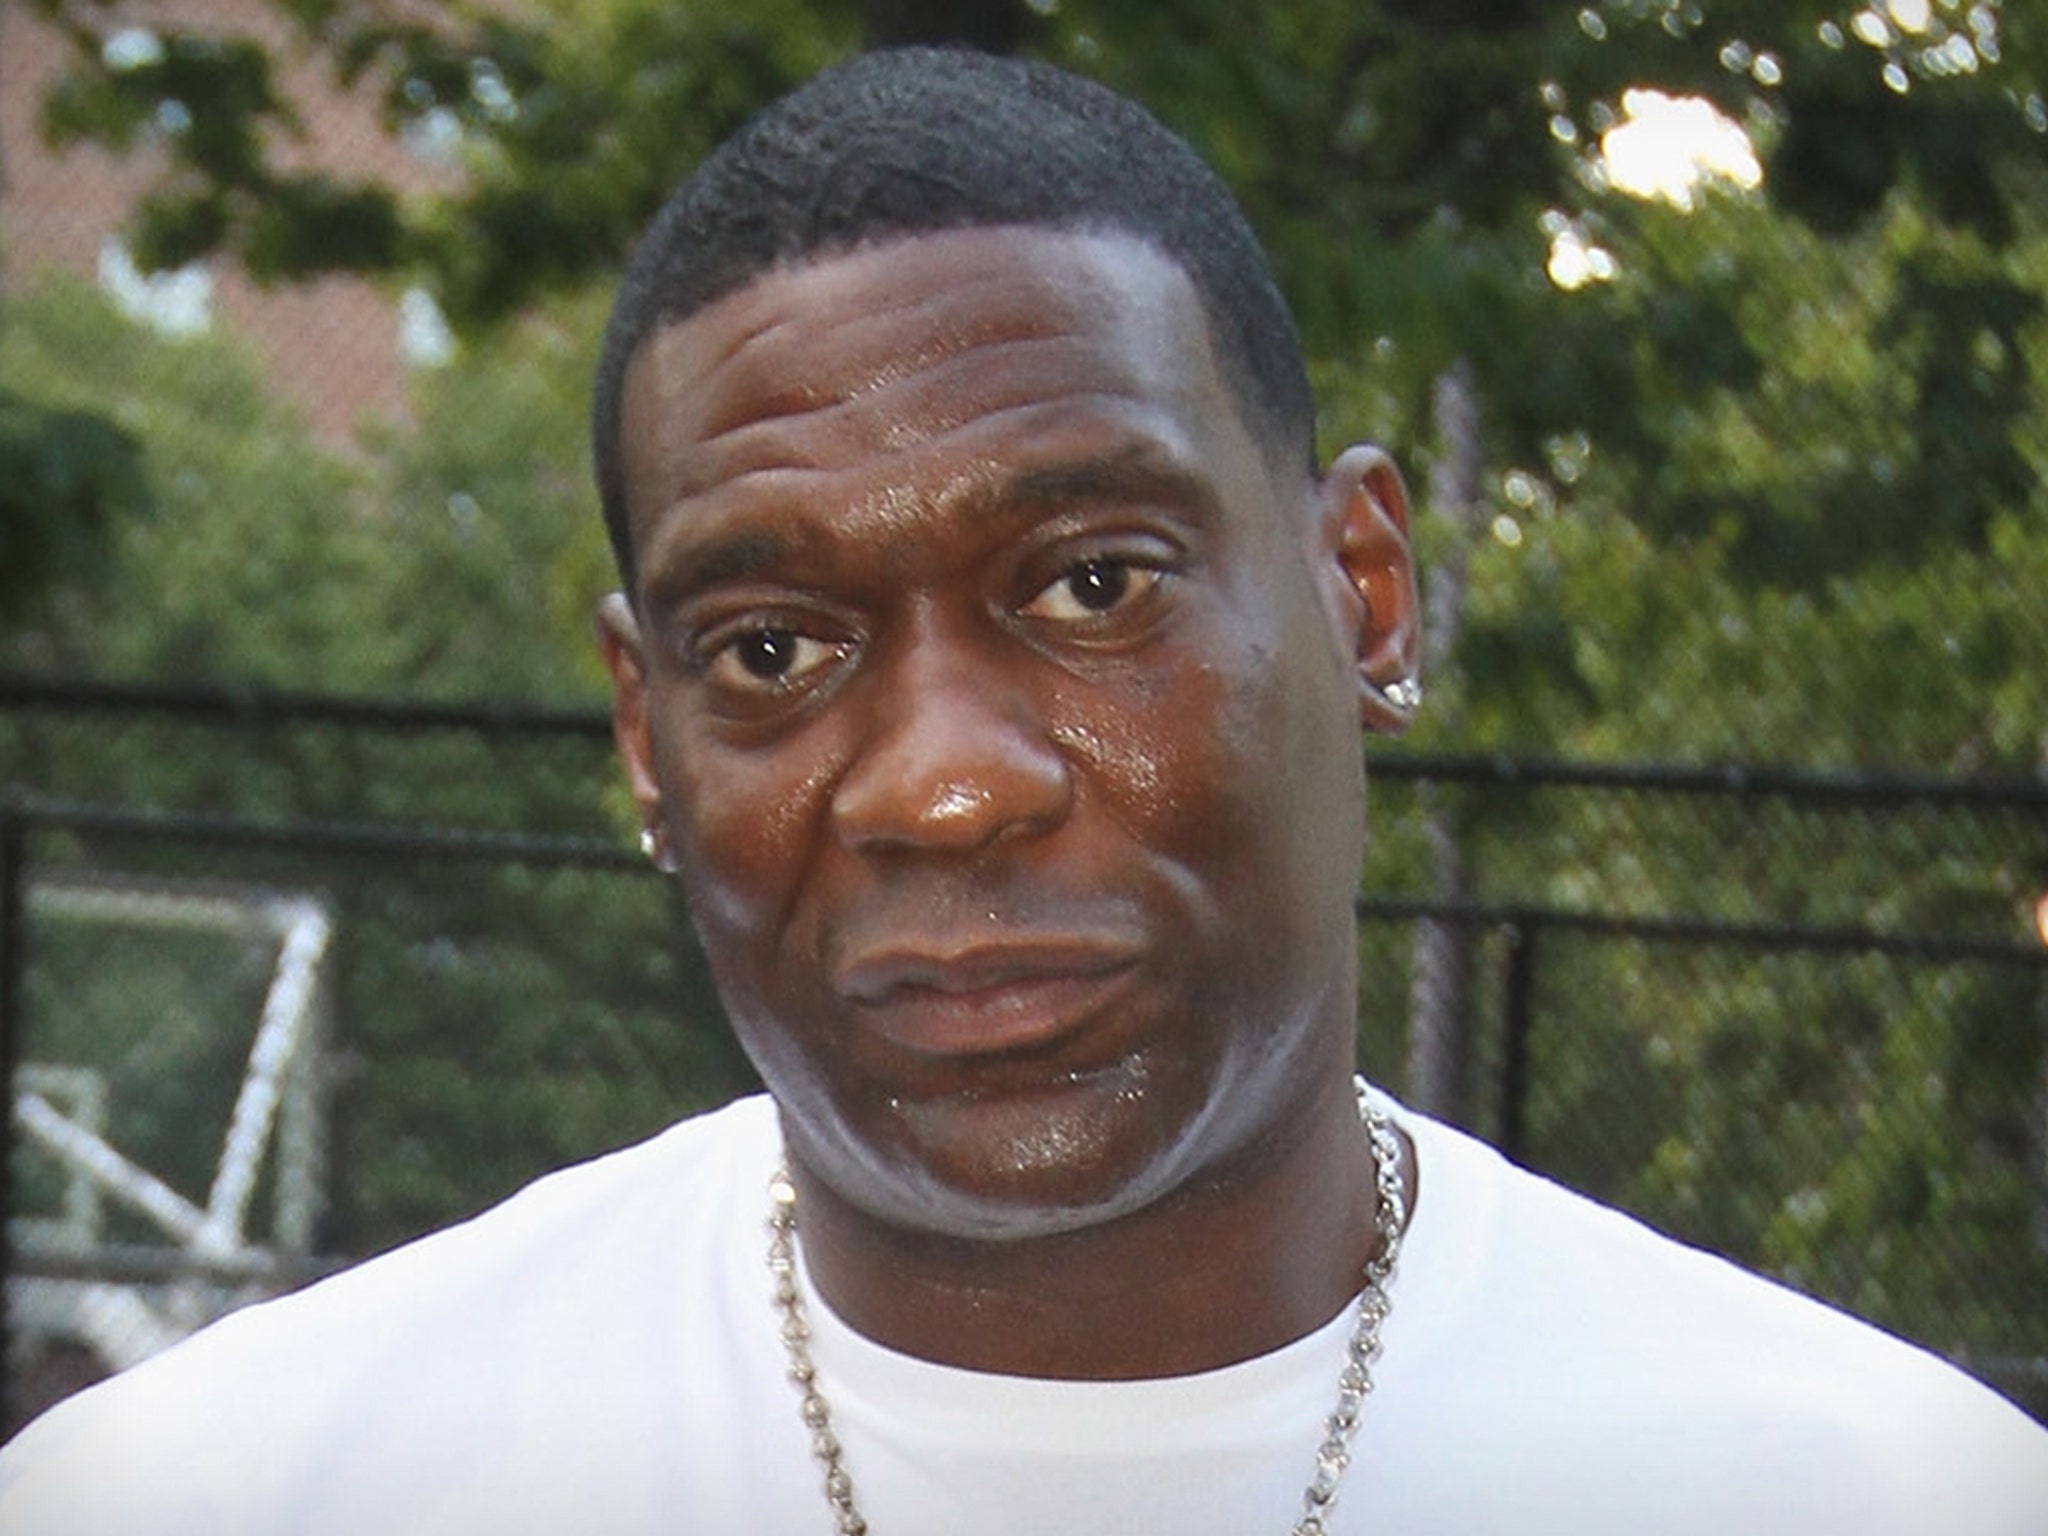 Sports World Reacts To Shawn Kemp Drive-By Shooting News - The